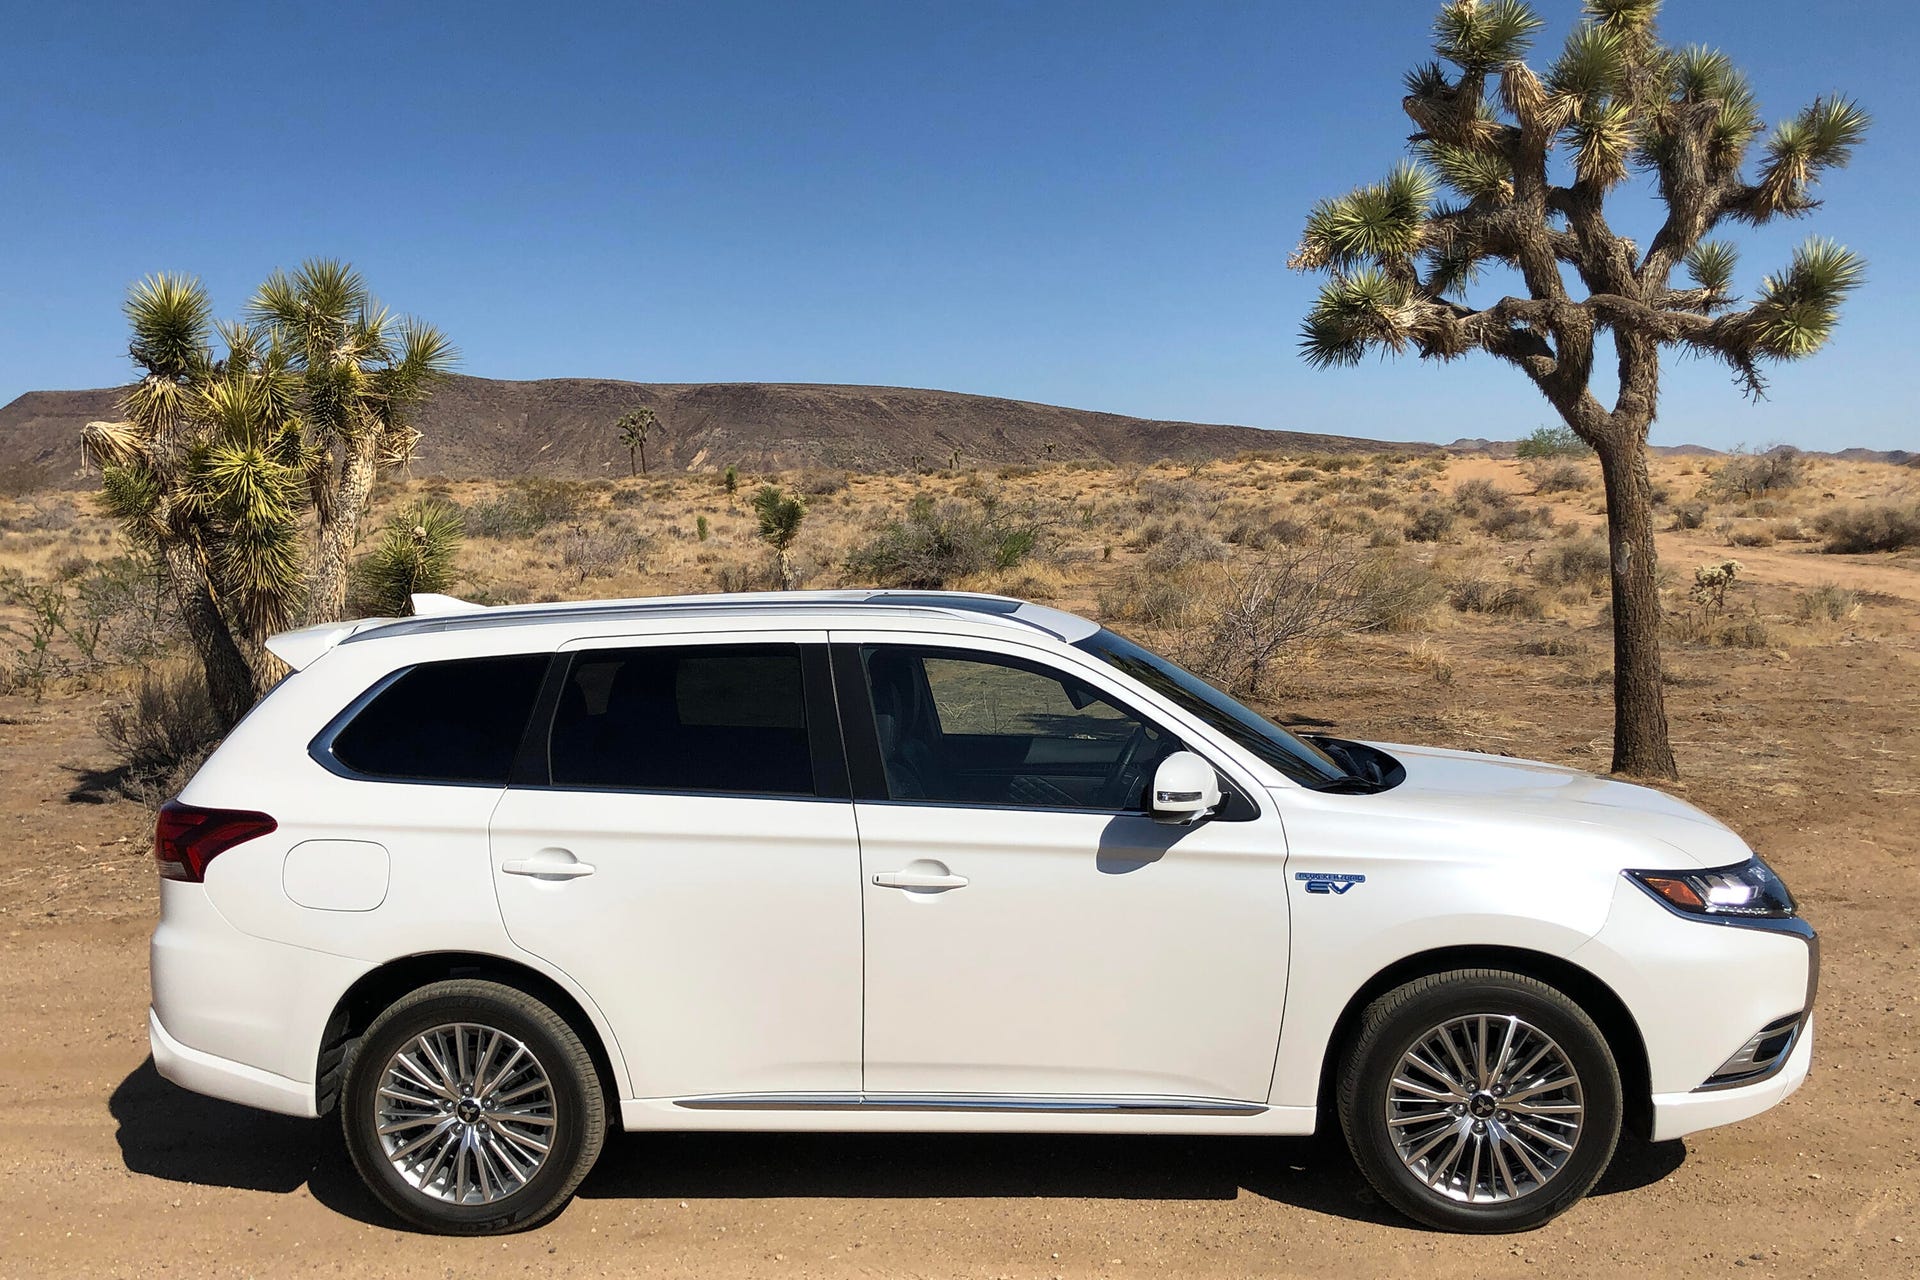 2021 Mitsubishi Outlander PHEV review: A better hybrid, but still hard to  recommend - CNET